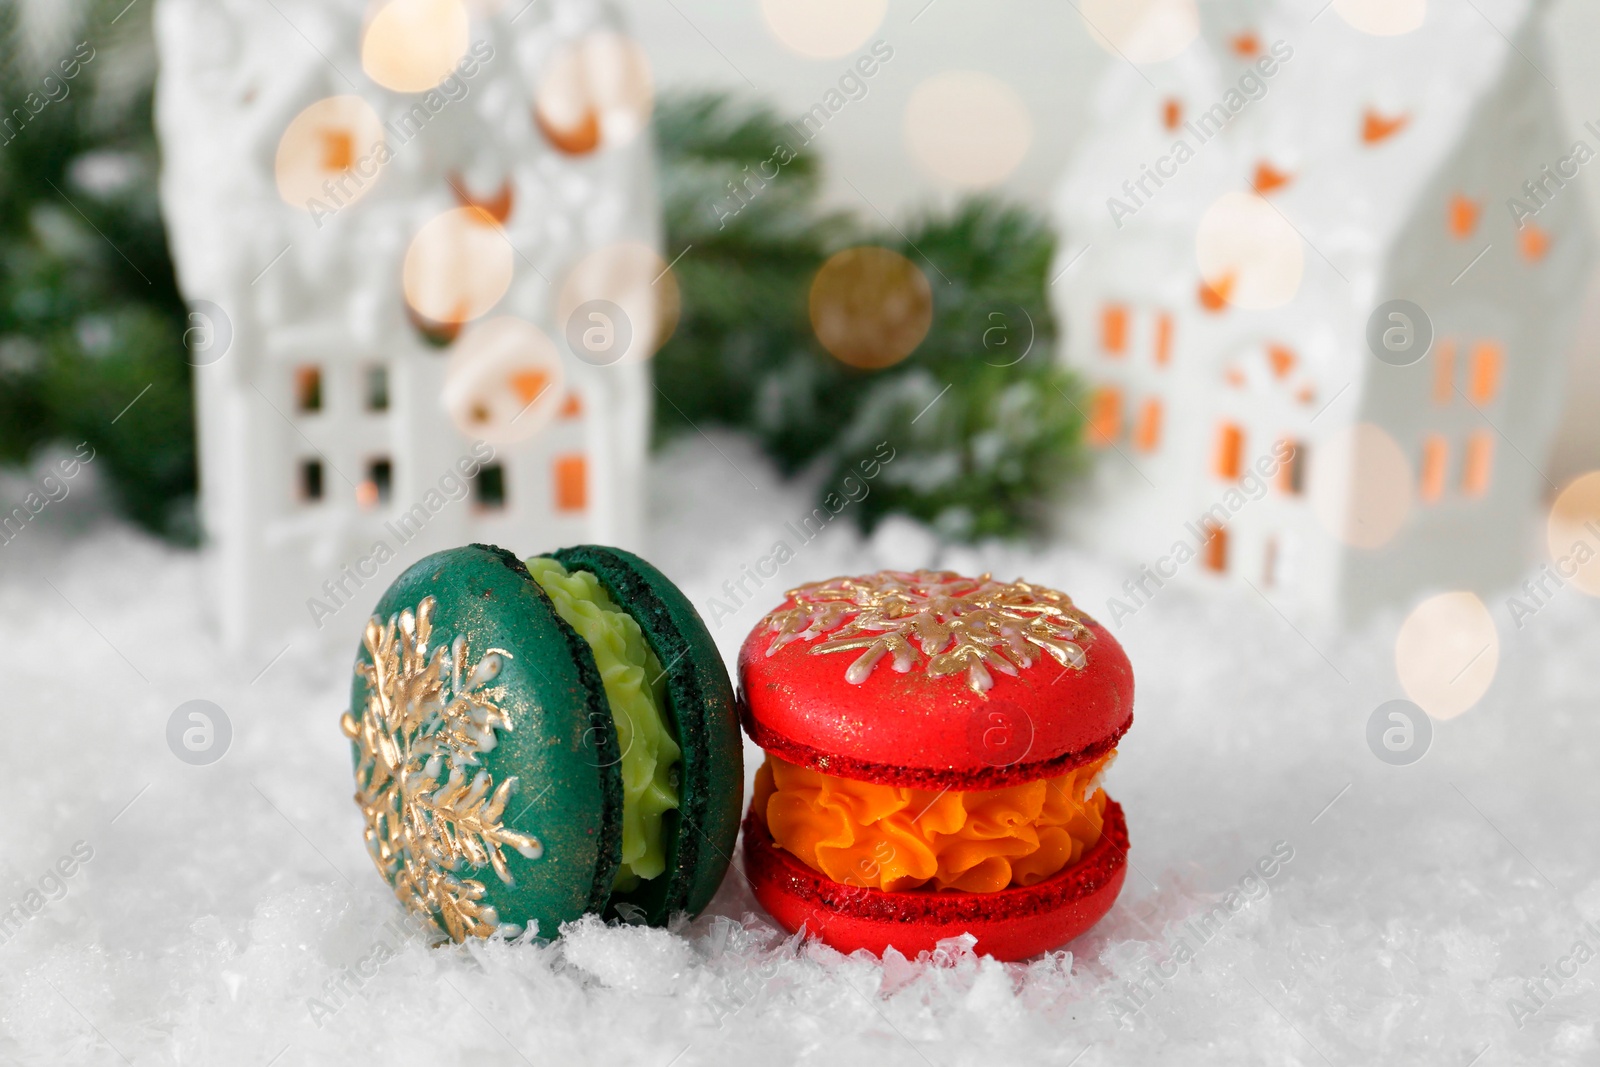 Photo of Different decorated Christmas macarons on table with artificial snow, closeup